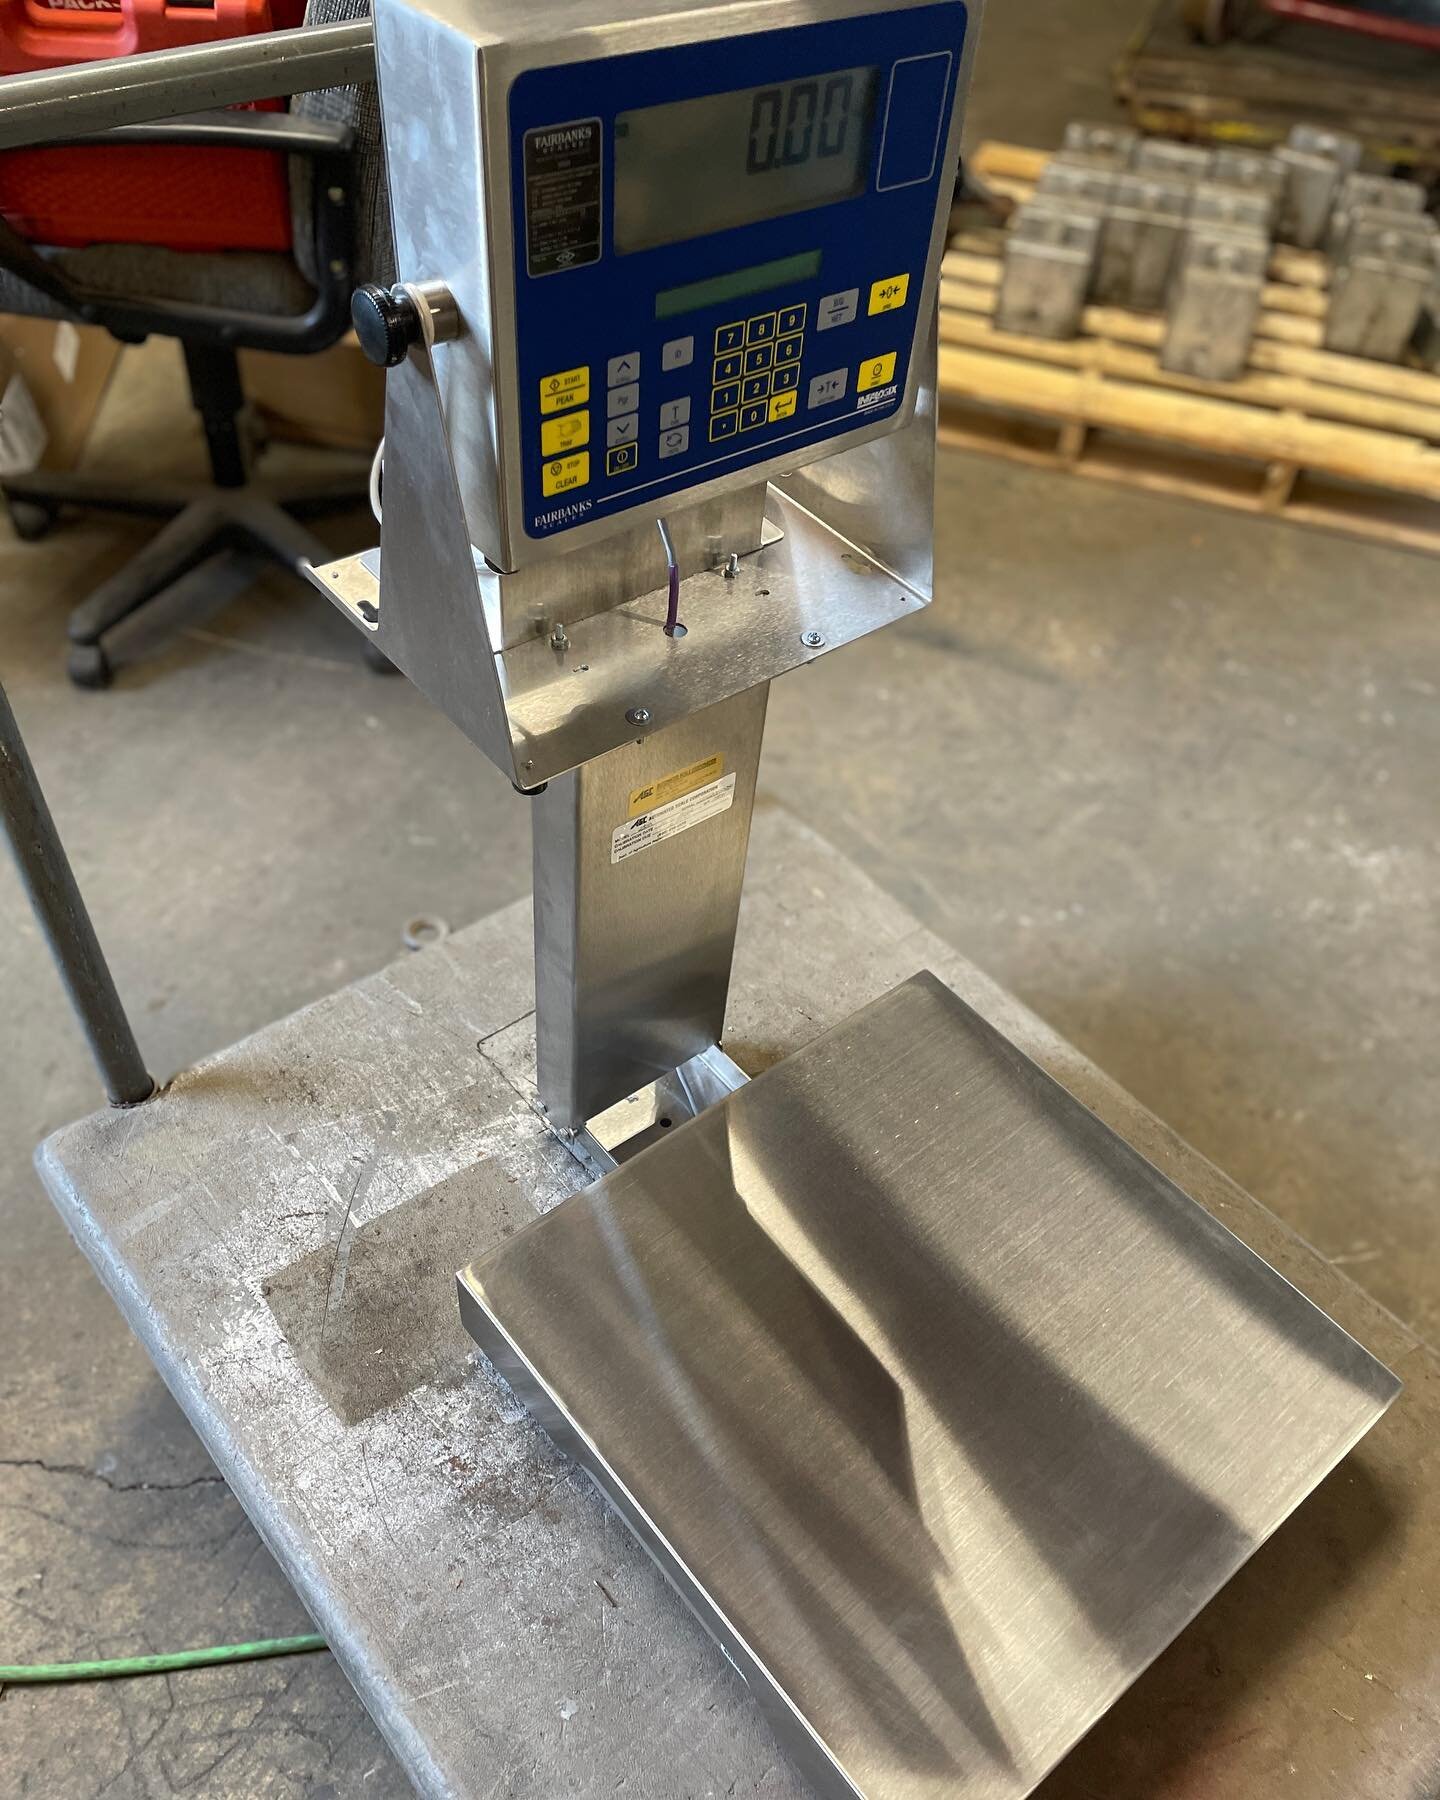 Fairbanks Intrinsically Safe Bench Scale.
This particular unit is using the FB2800 Indicator and Battery Option (which mounts on the back on the back of the bracket)
Rated for ALL Classes, Divisions, &amp; Groups.
100 lb 18&rdquo;x18&rdquo; stainless